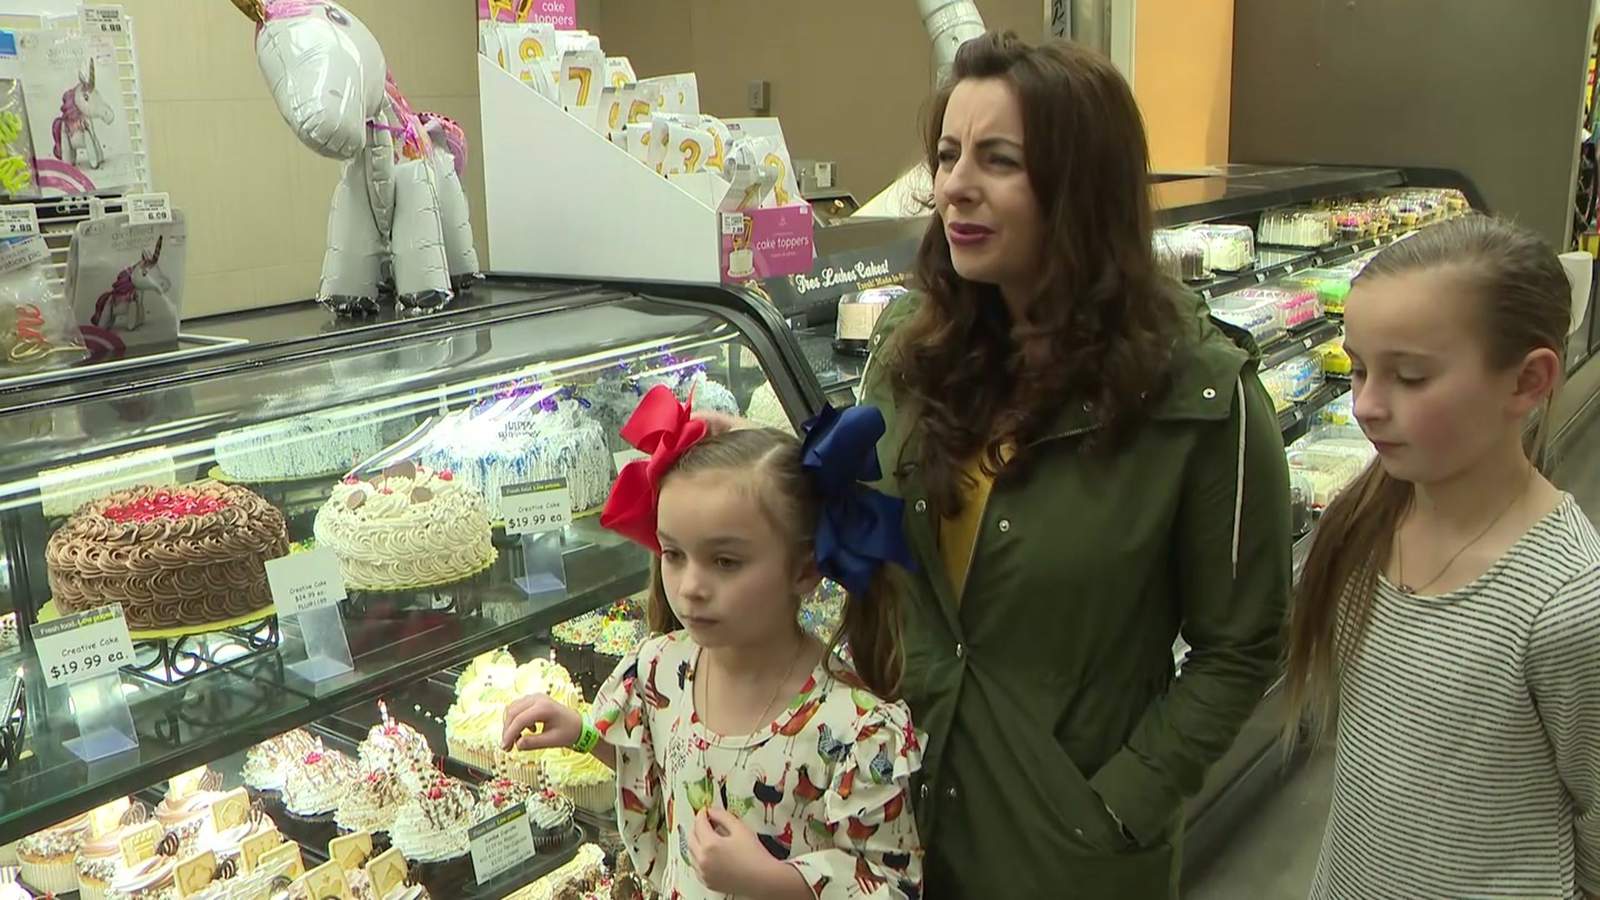 Grieving mother pays for another child’s birthday cake to honor her son